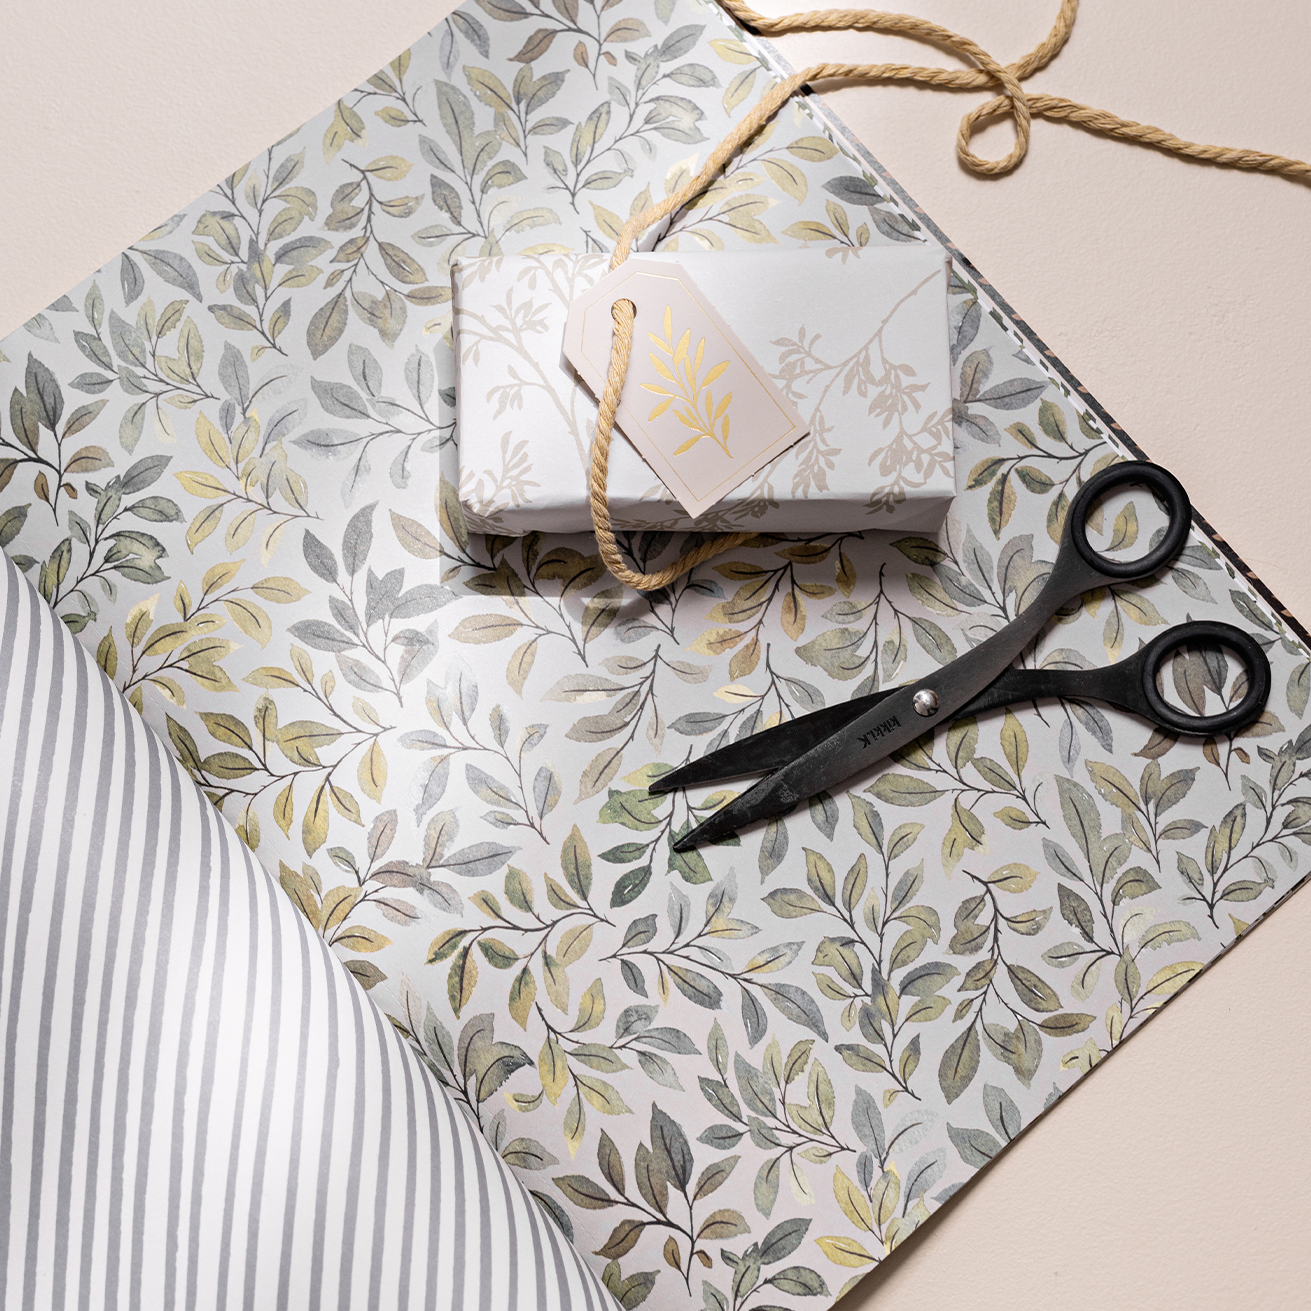 That's A Wrap: Organizing Your Gift Wrapping Supplies — The Little Details  home + office + digital organizing studio